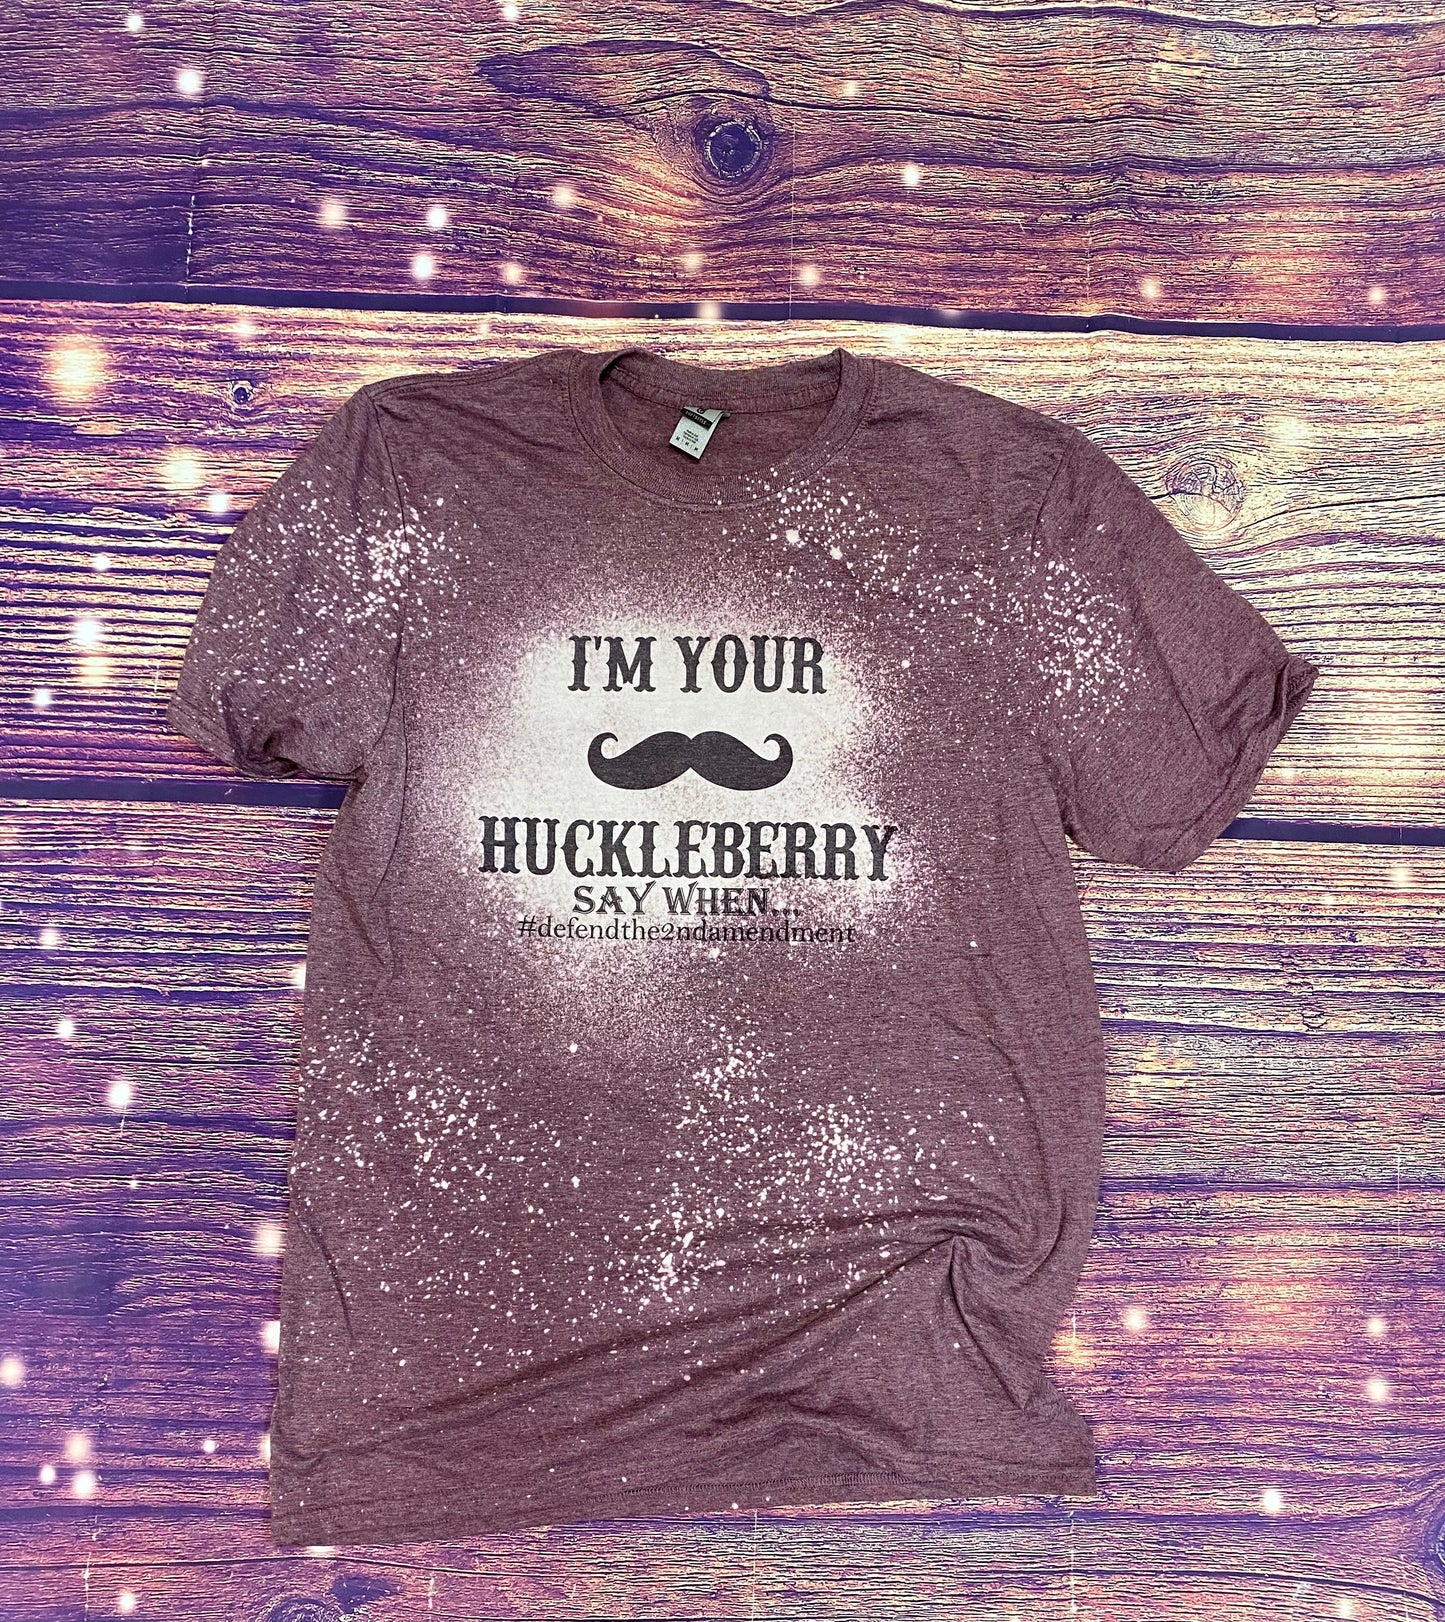 I’m your huckleberry defend the 2nd amendment Bleach Tee